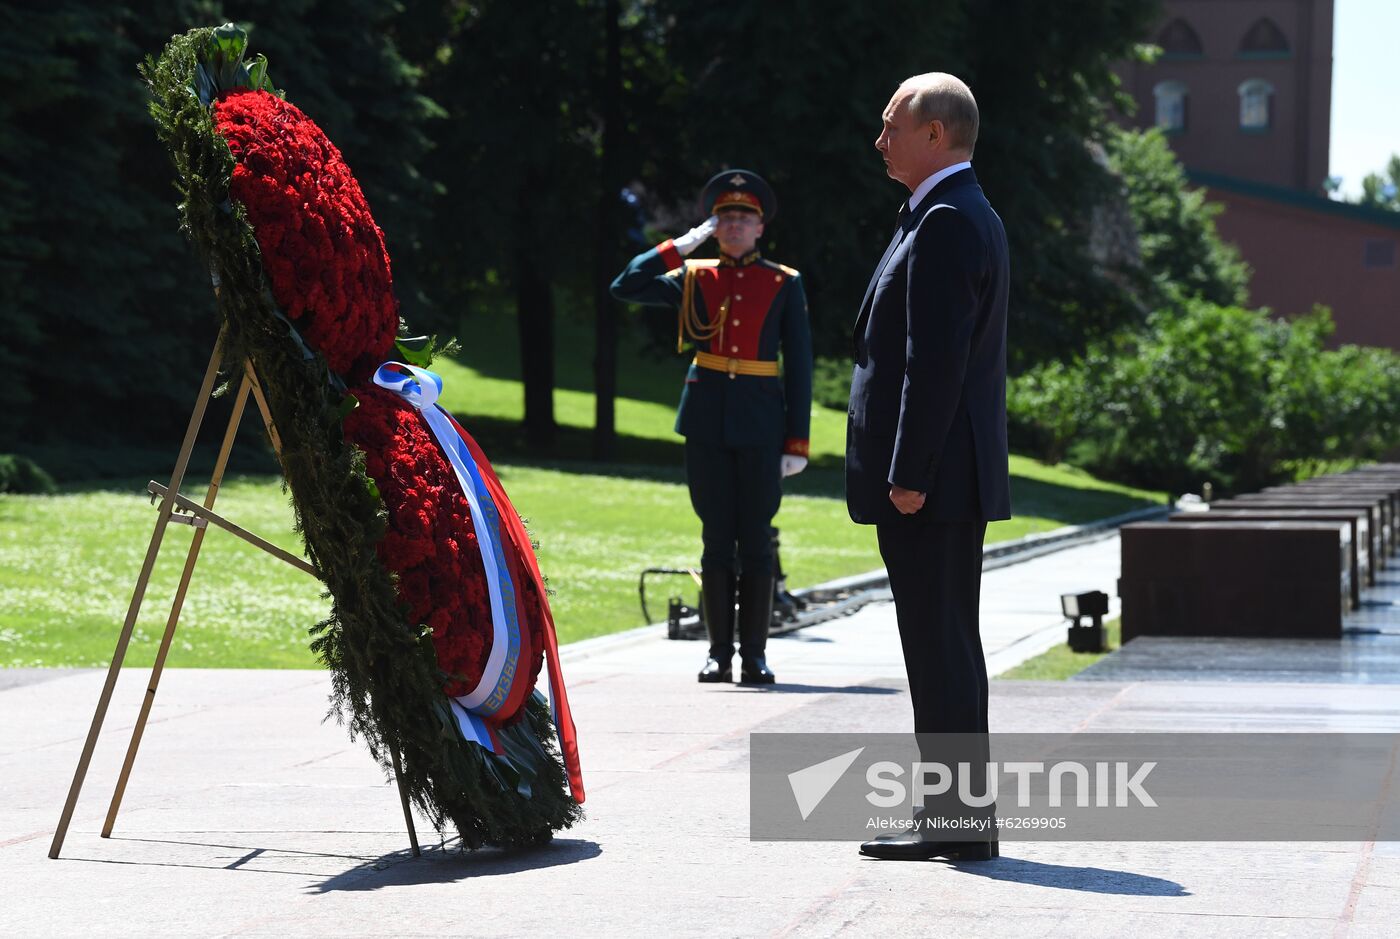 Russia Putin WWII Victims Remembrance Day